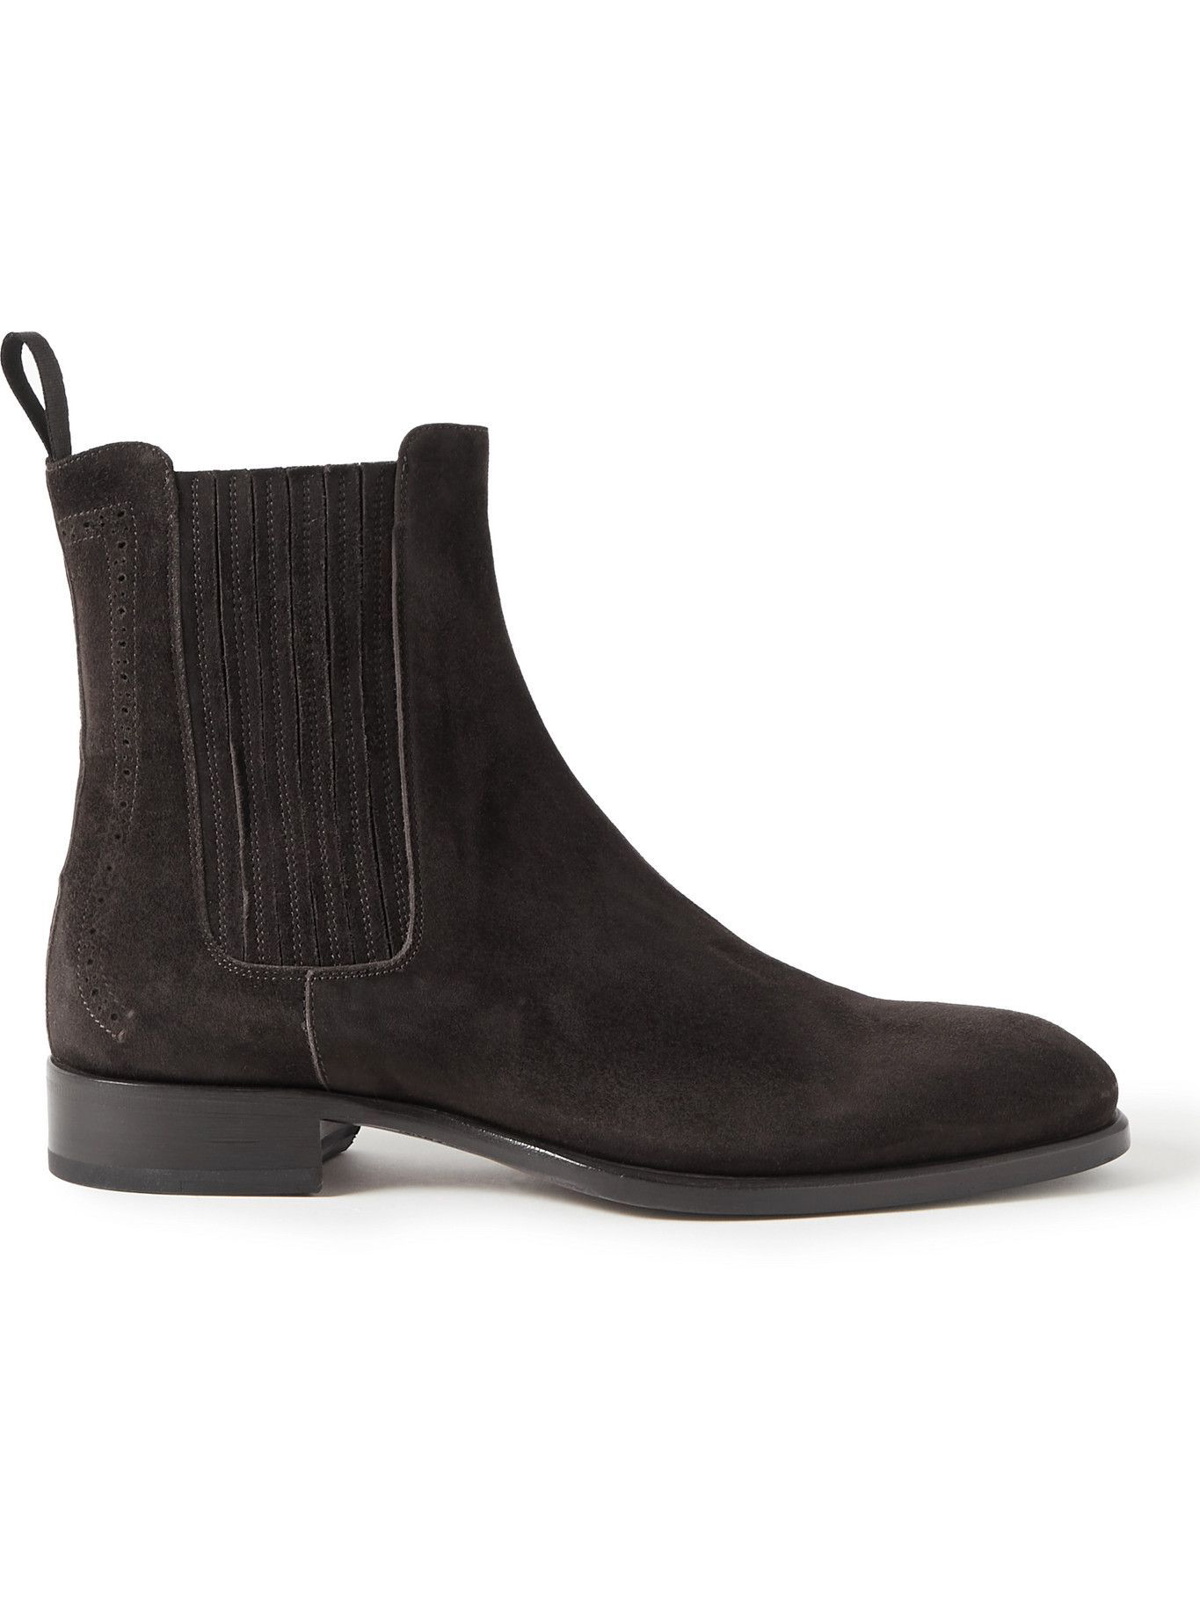 Brioni Brown Side Gusset Chelsea Boots Brioni